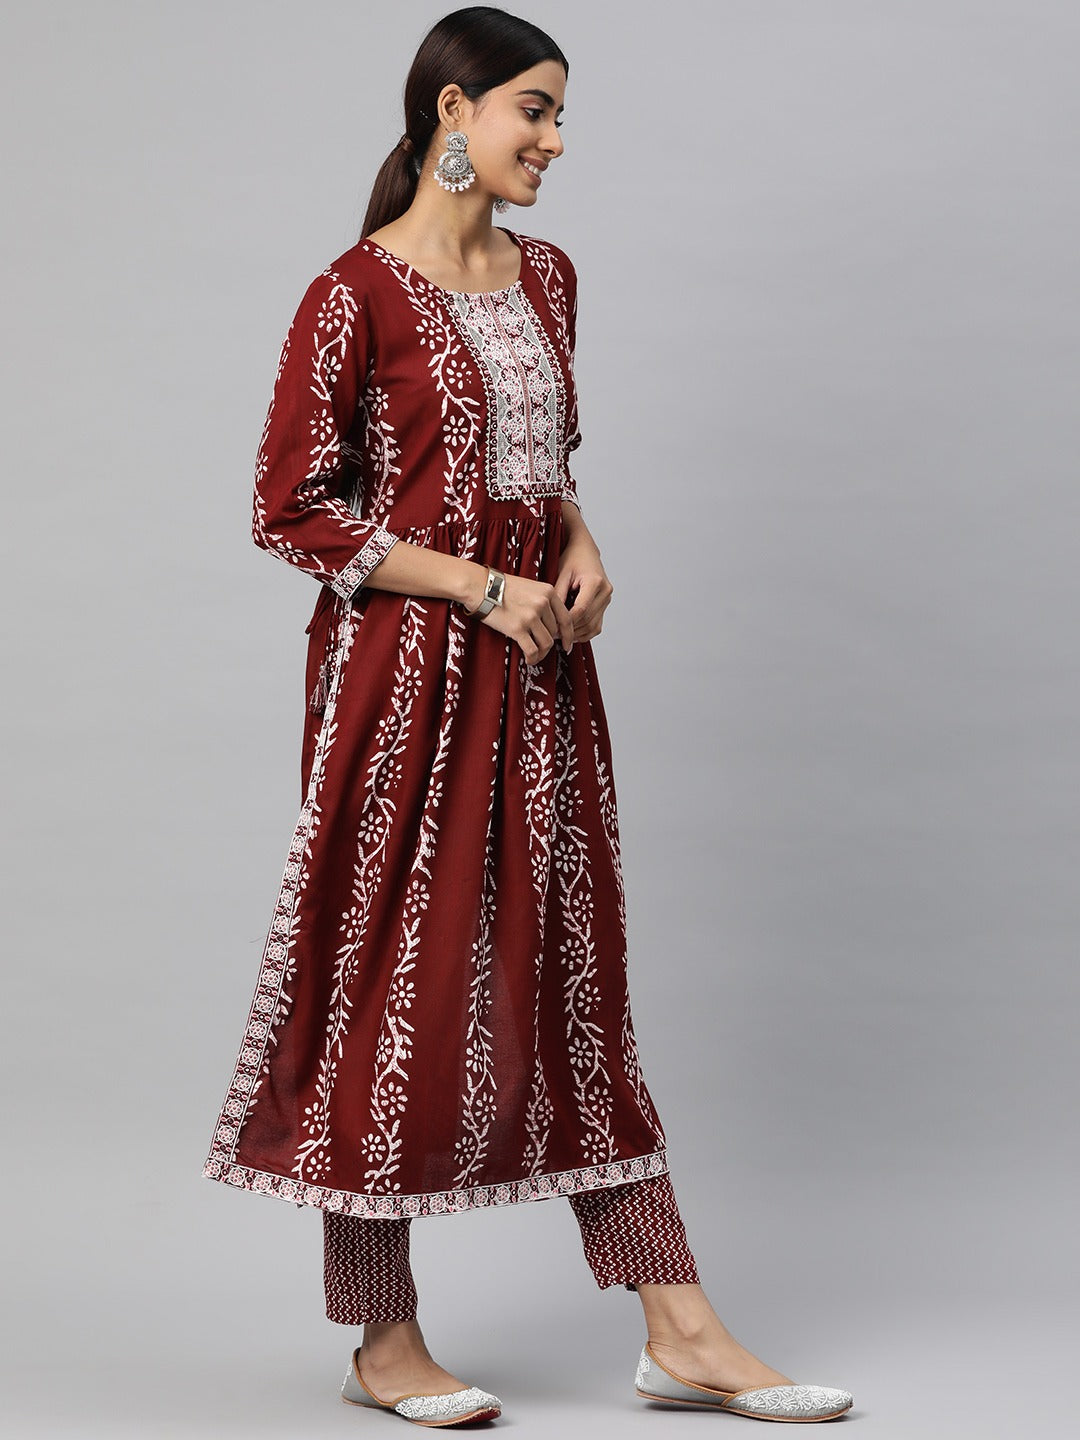 Flared Style Cotton Fabric Maroon Color Kurta And Bottom With Dupatta